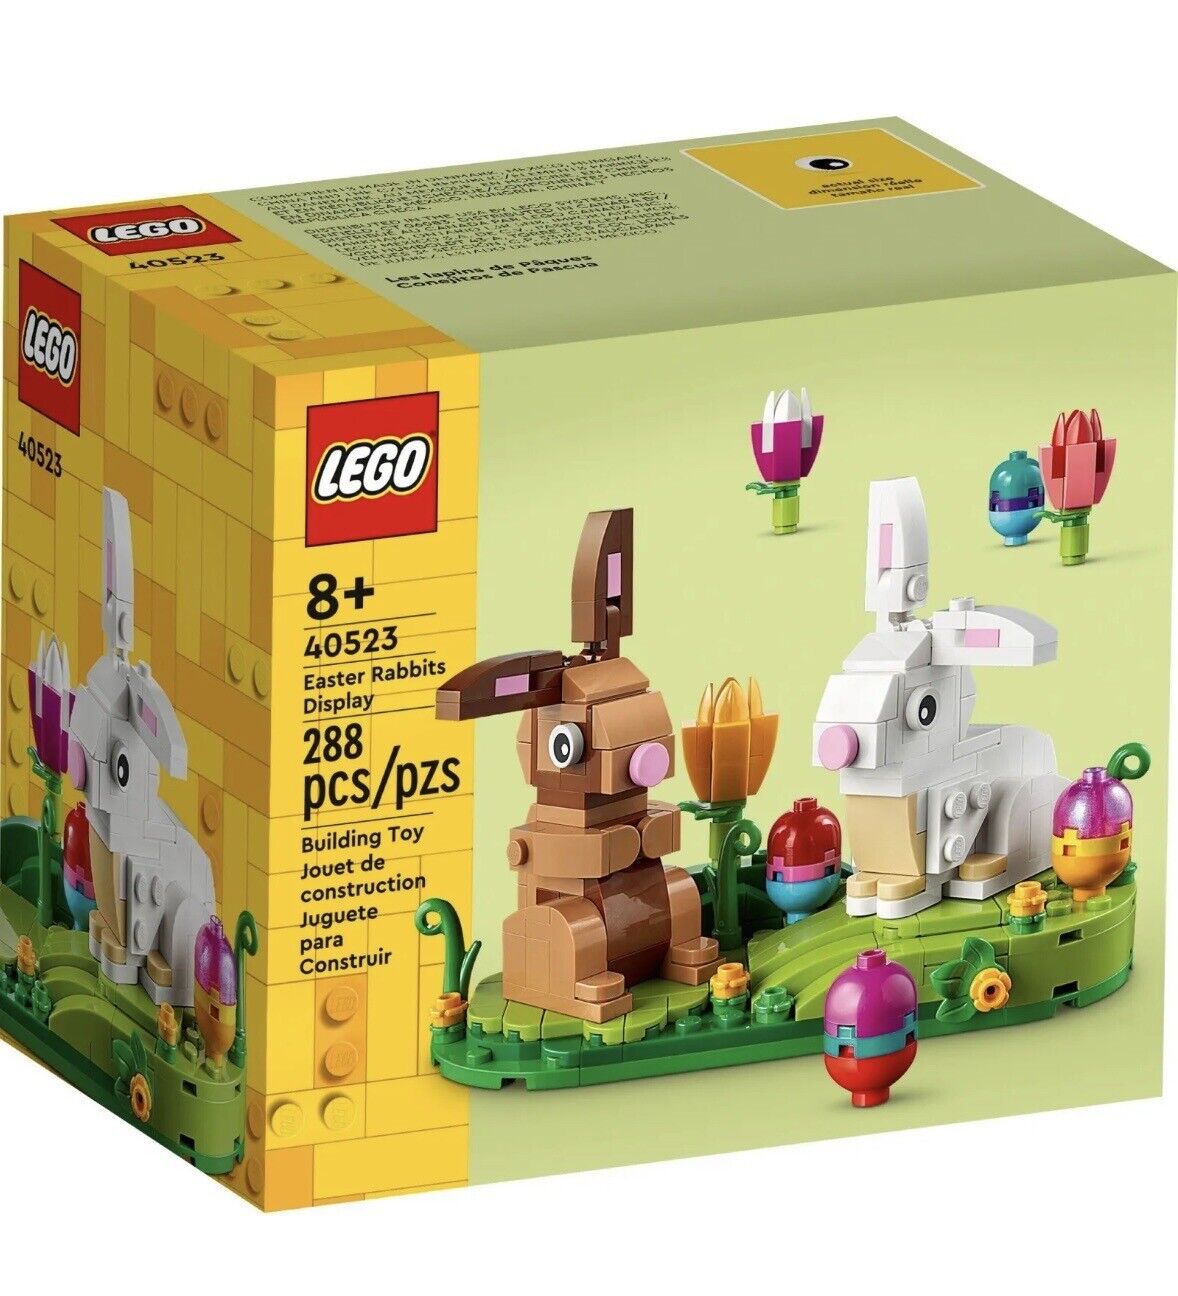 LEGO 40523: Easter Rabbits **New In Sealed Box**. Ships Free